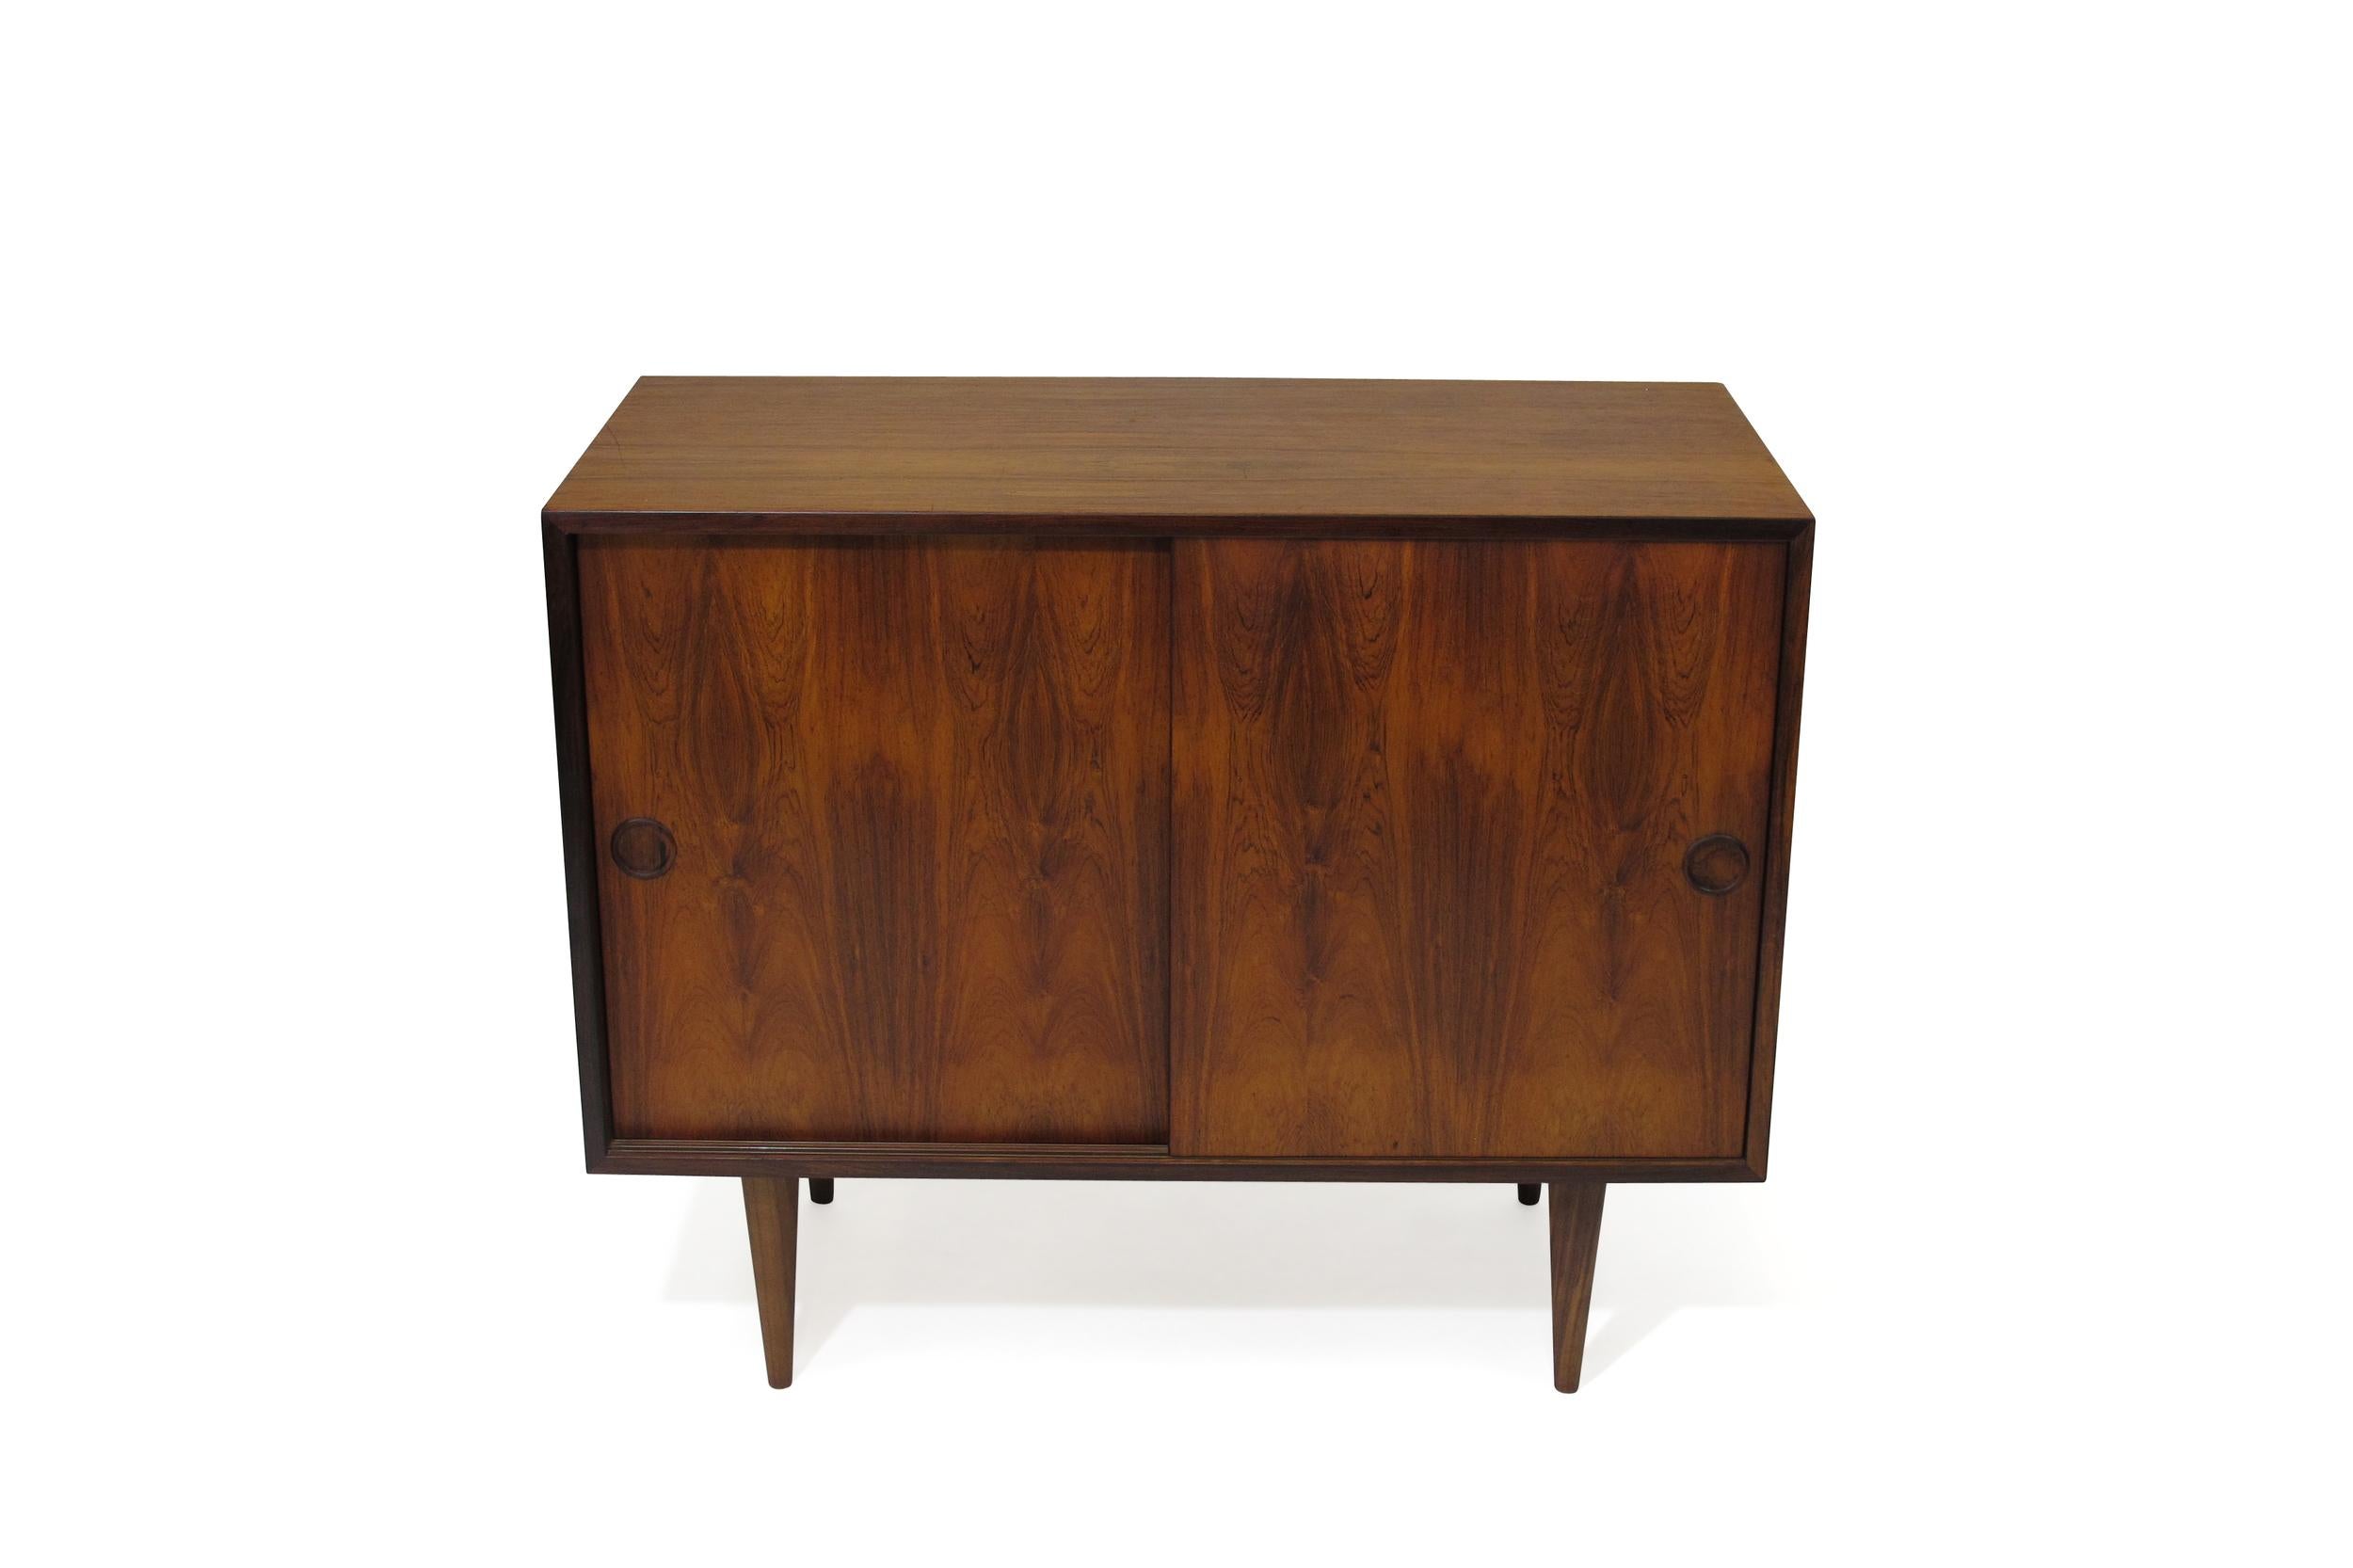 Rosewood cabinet designed by Kai Kristiansen with book-matched sliding doors, revealing a mahogany interior with an adjustable shelf and silverware drawer. Minimal design with lovely details such as mitered corners and hand-carved inset pulls. Can